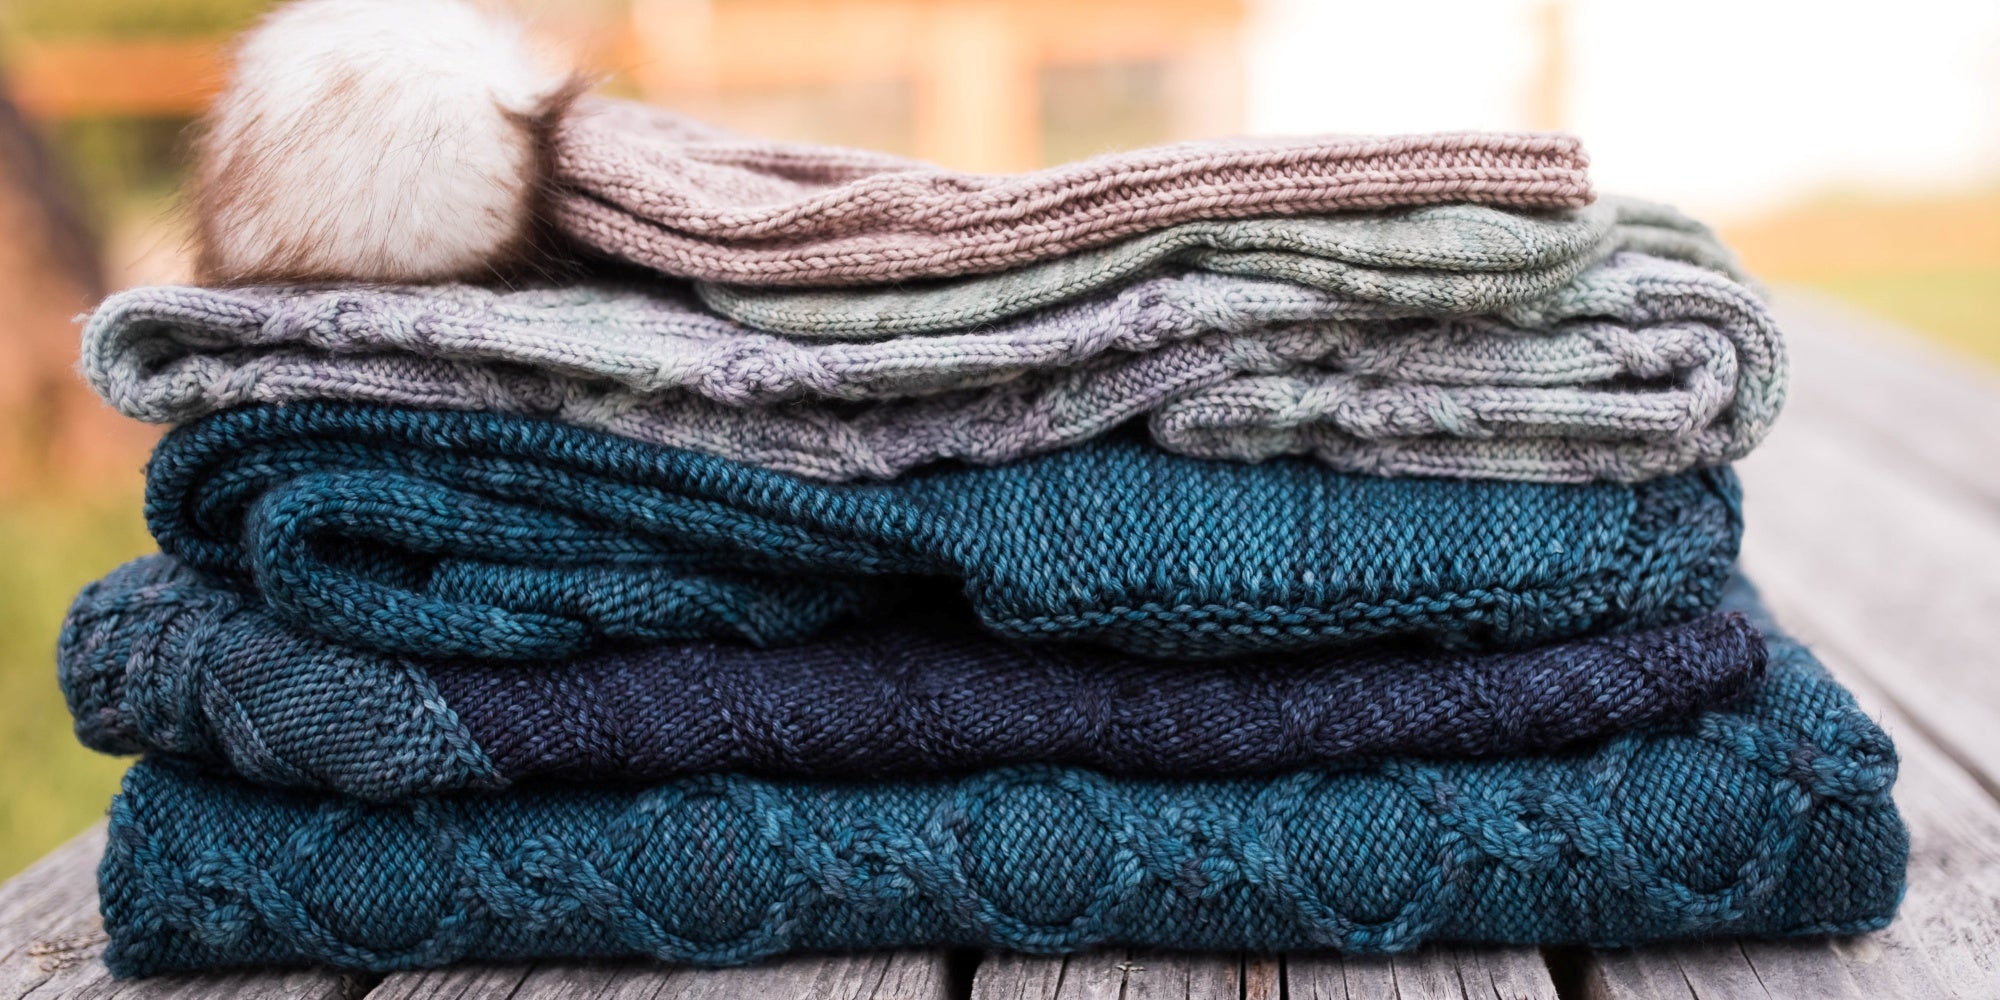 five knitted items, all cabled, in various shades of blue and beige, are folded in a squishy stack